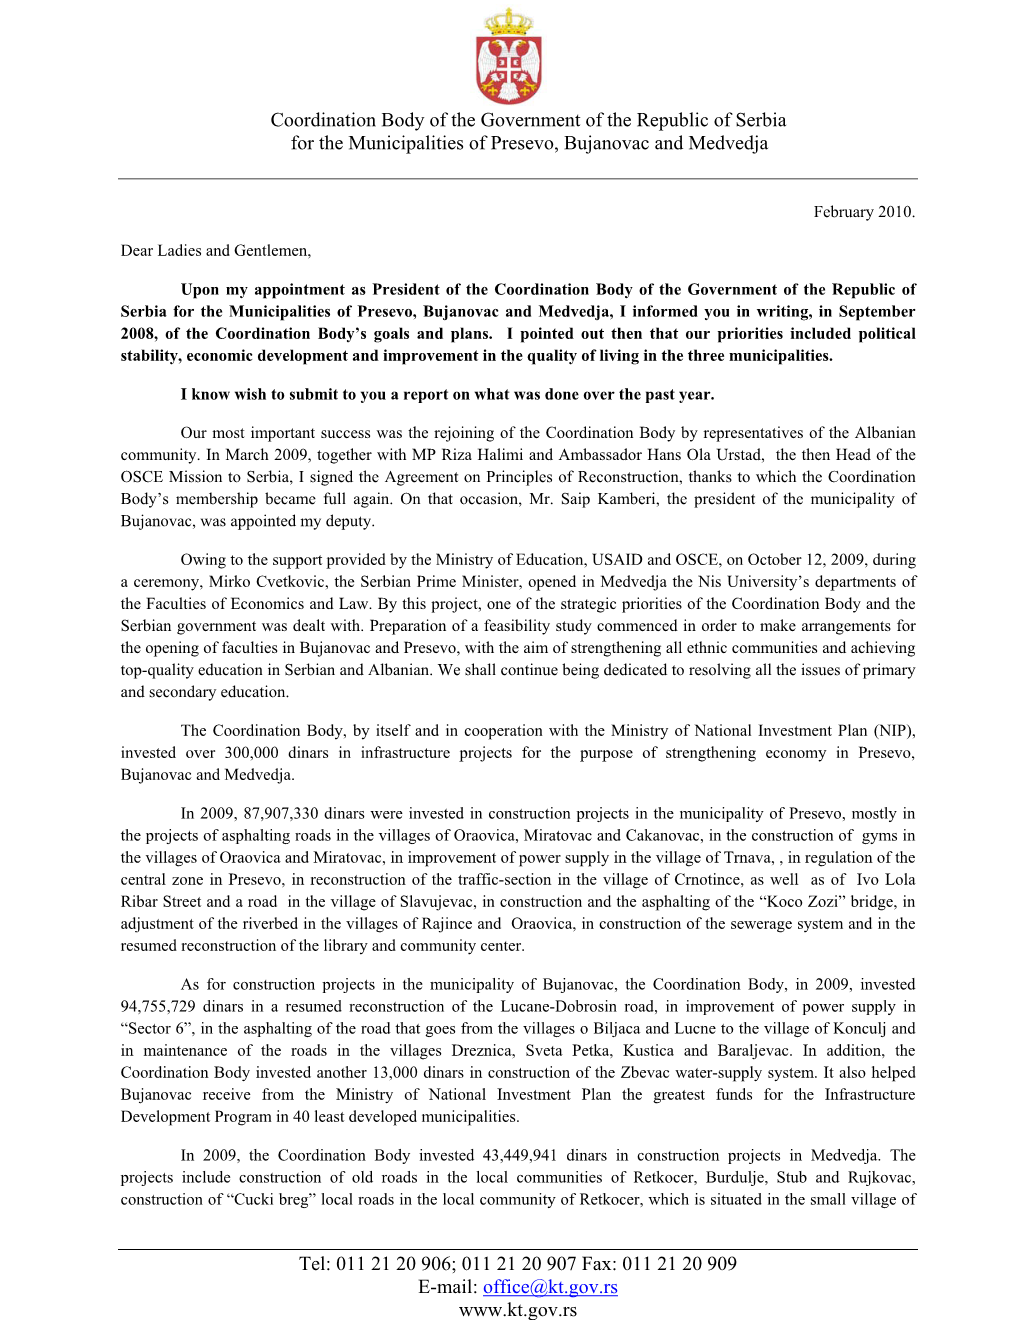 Coordination Body of the Government of the Republic of Serbia for the Municipalities of Presevo, Bujanovac and Medvedja